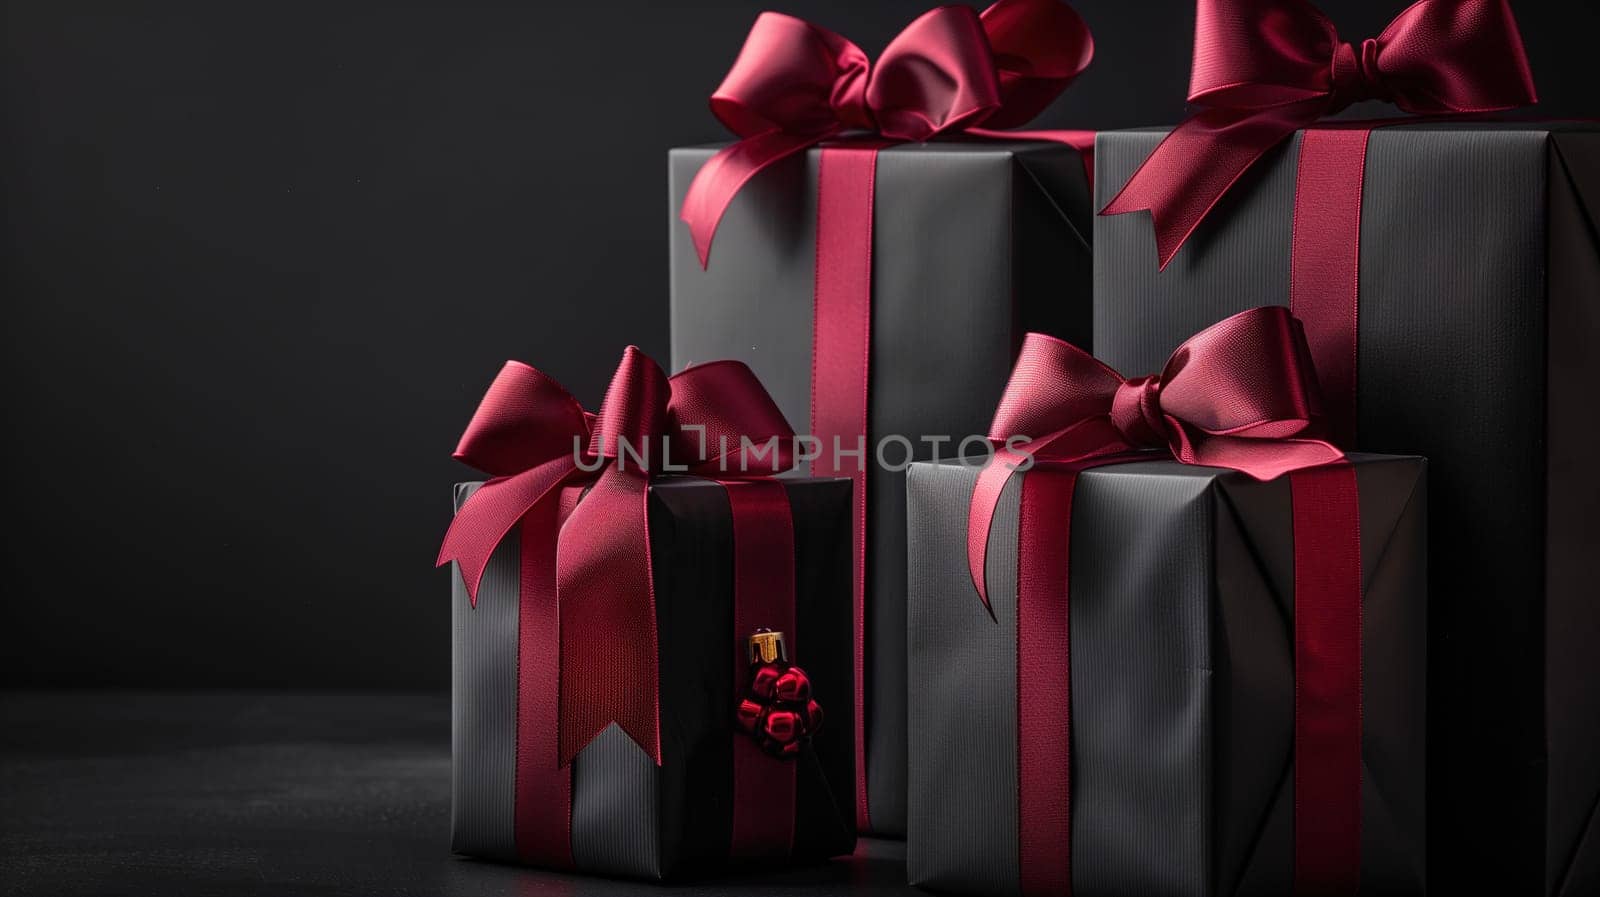 Three presents, wrapped in black and red paper and topped with red bows, are displayed in a neat row. The gifts are ready for a sale or special occasion like Black Friday.